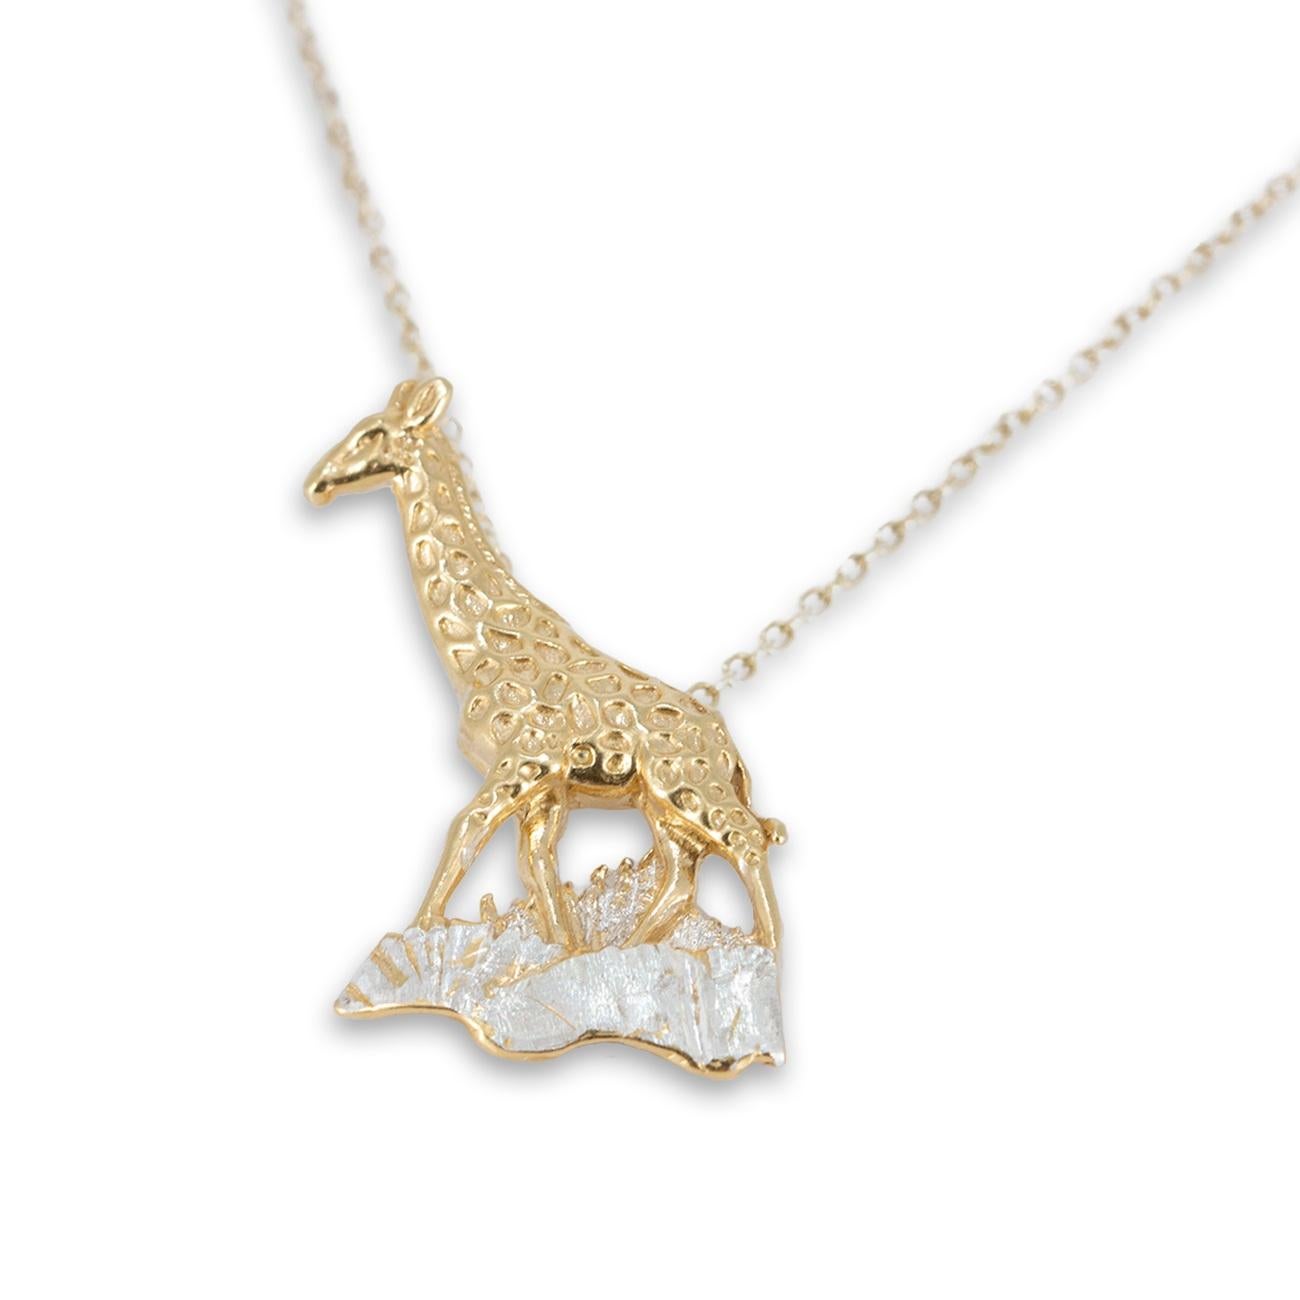 Contemporary Solid Silver Giraffe Pendant with 18 Karat Gold Vermeil For Sale